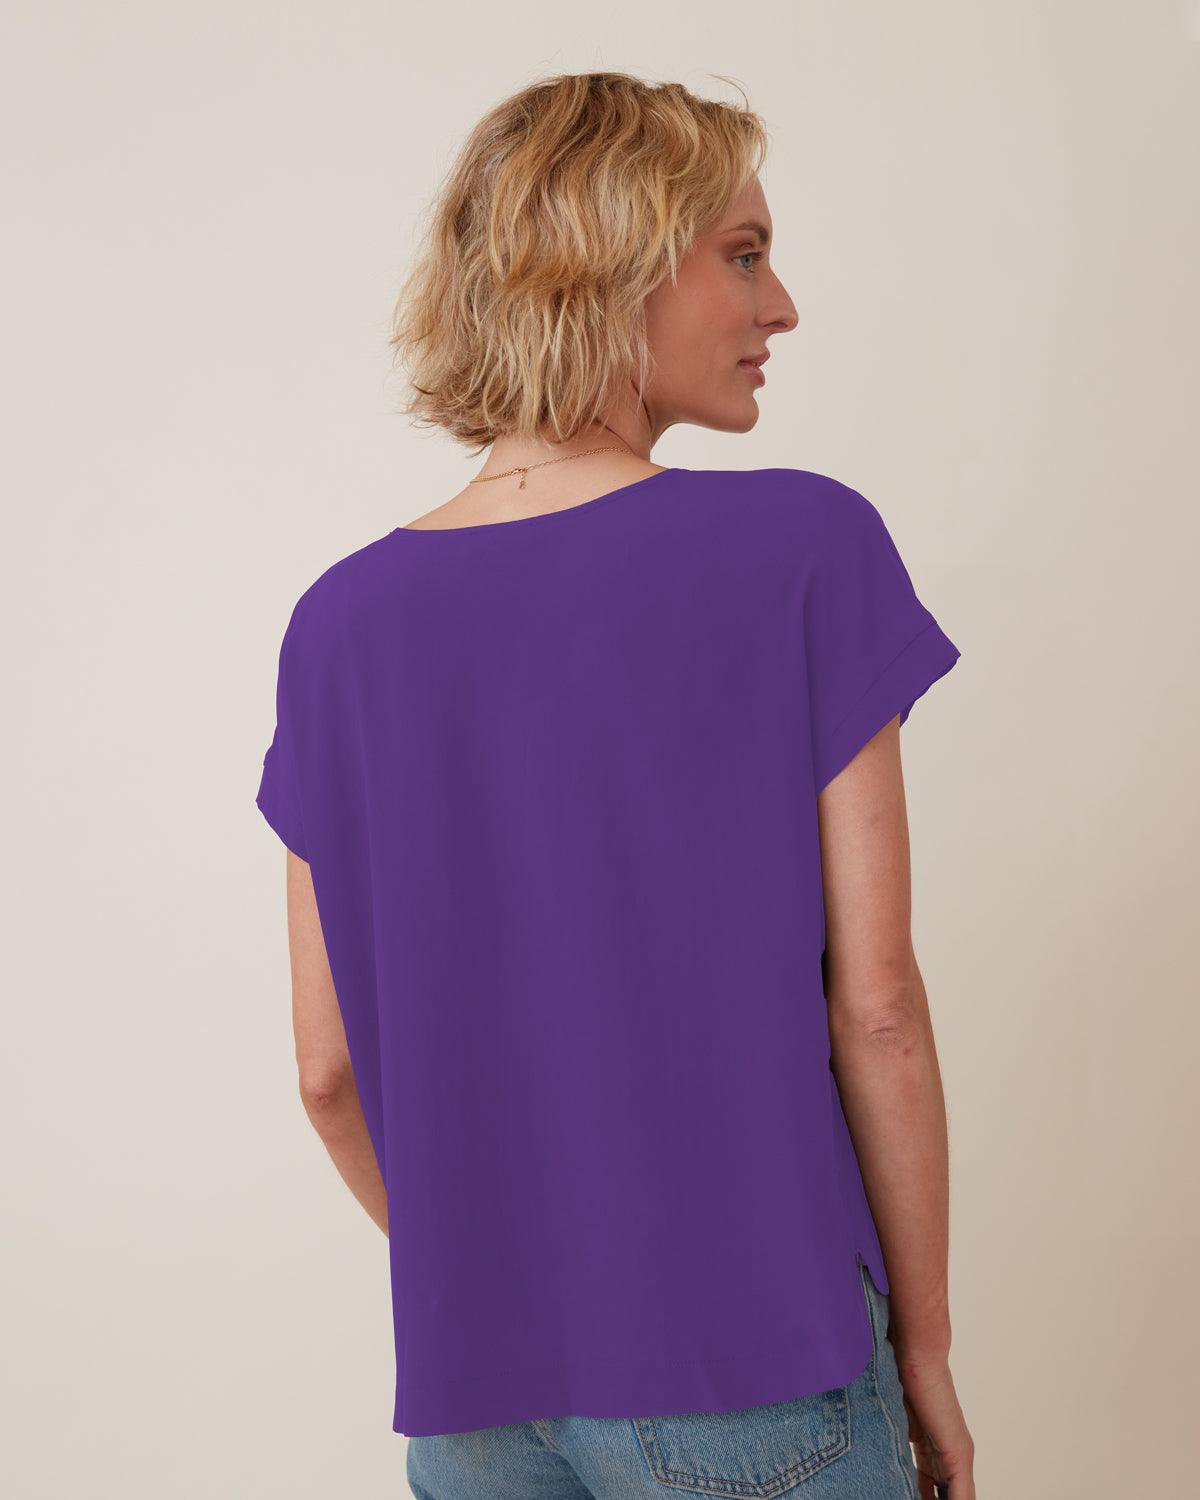 "#color_AMETHYST|Elyse is 5'9", wearing a size XS